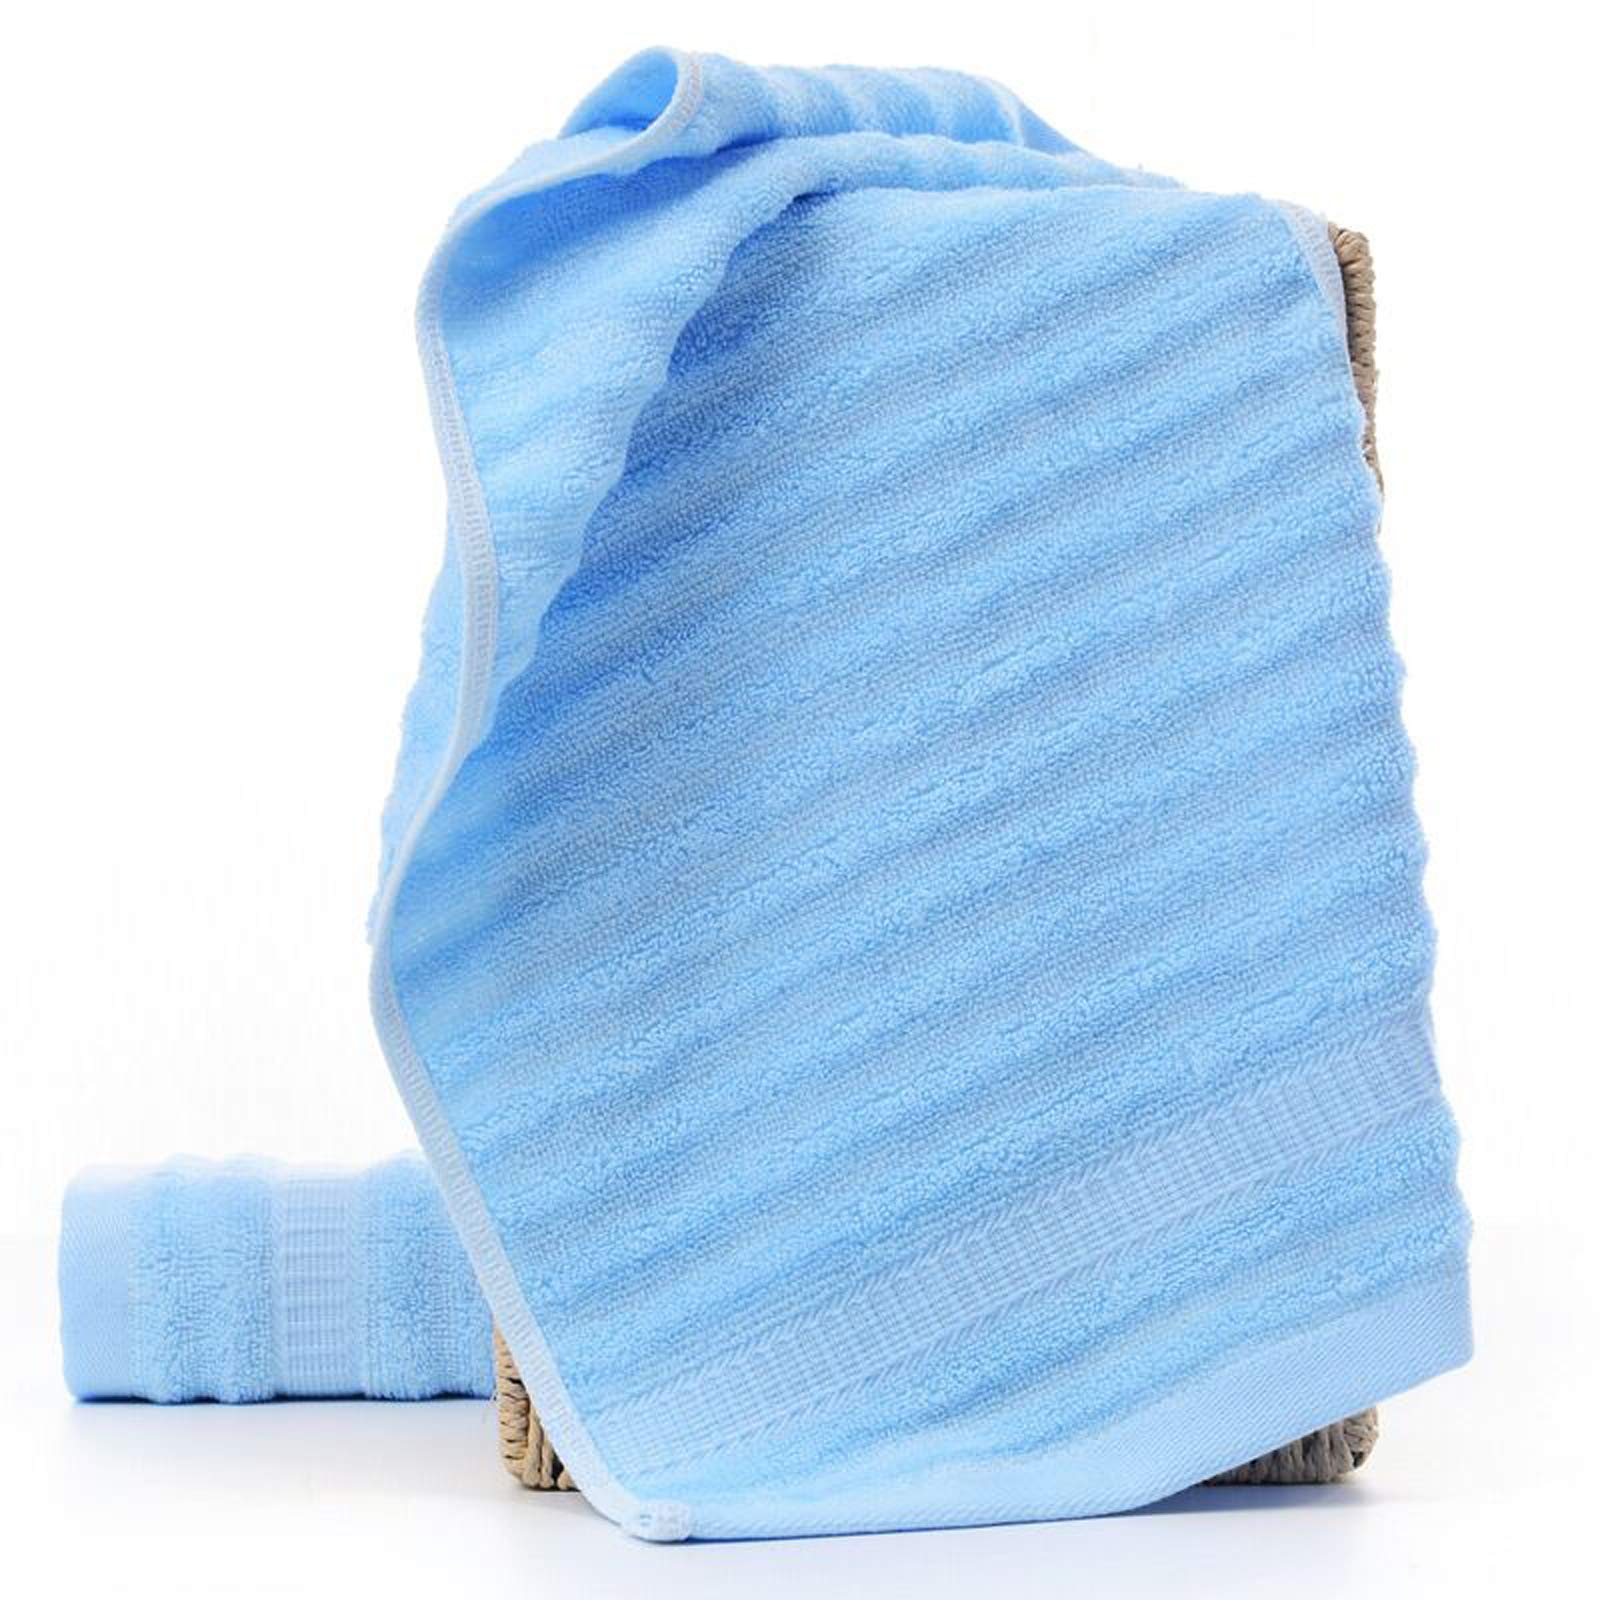 Mush Bamboo Hand Towel Set of 2 | 100% Bamboo | Ultra Soft, Absorbent & Quick Dry Towel for Daily use. Gym, Pool, Travel, Sports and Yoga | 75 X 35 cms | 600 GSM (Sky Blue)